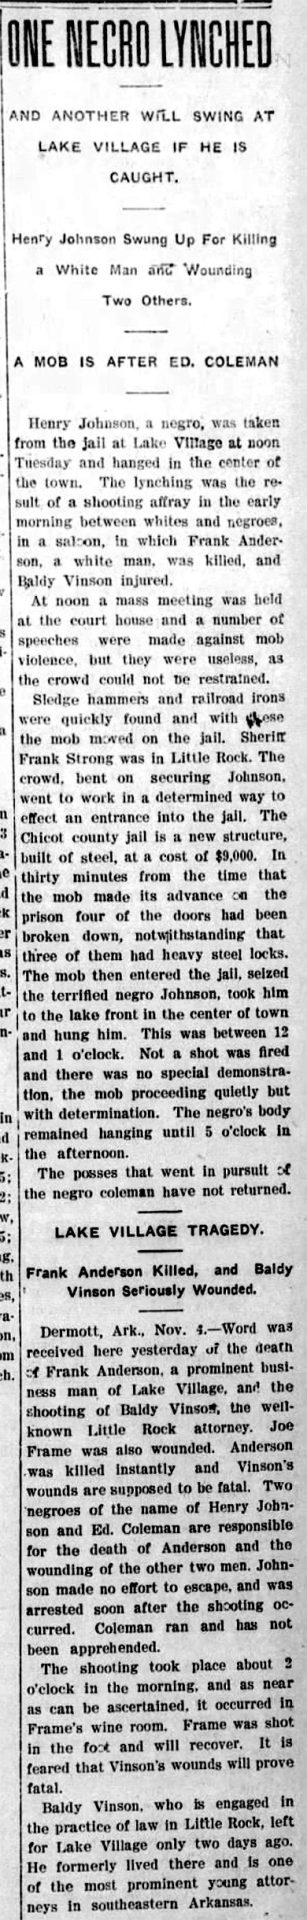 "One Negro lynched" newspaper clipping